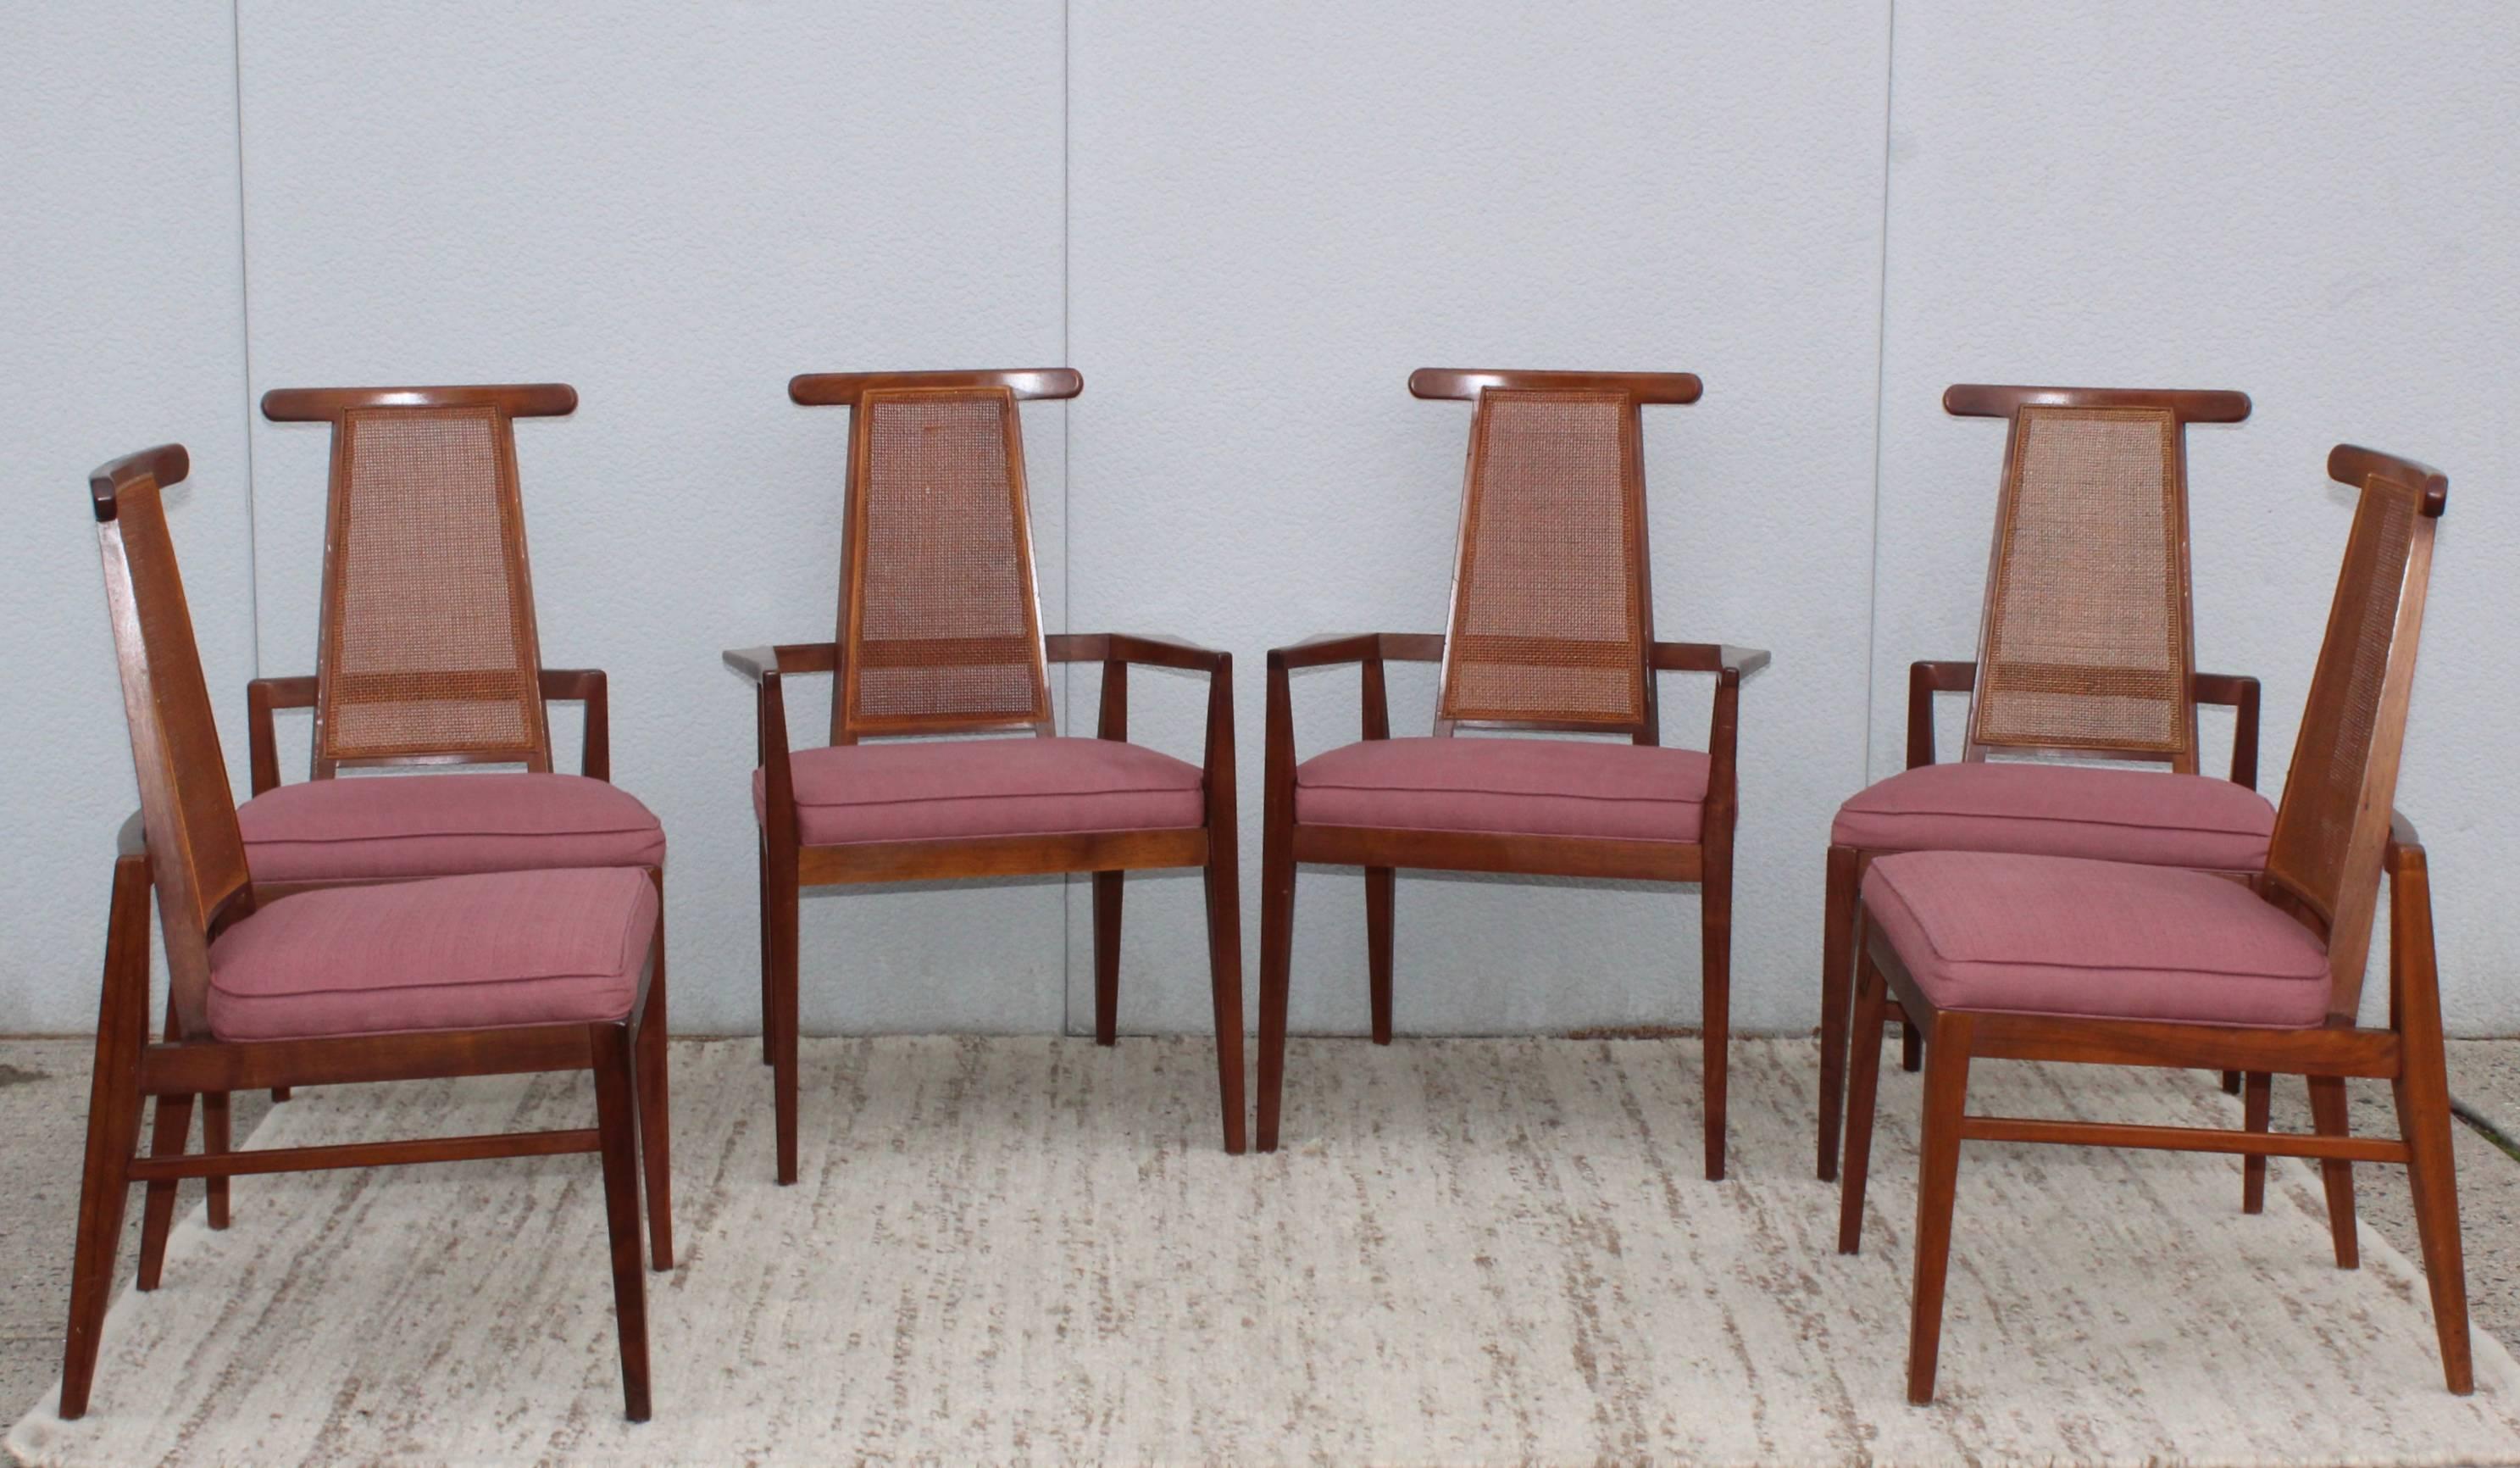 Stunning set of six Foster McDavid walnut dining chairs. Two armchairs and four side chairs with vintage upholstery and cane backs.